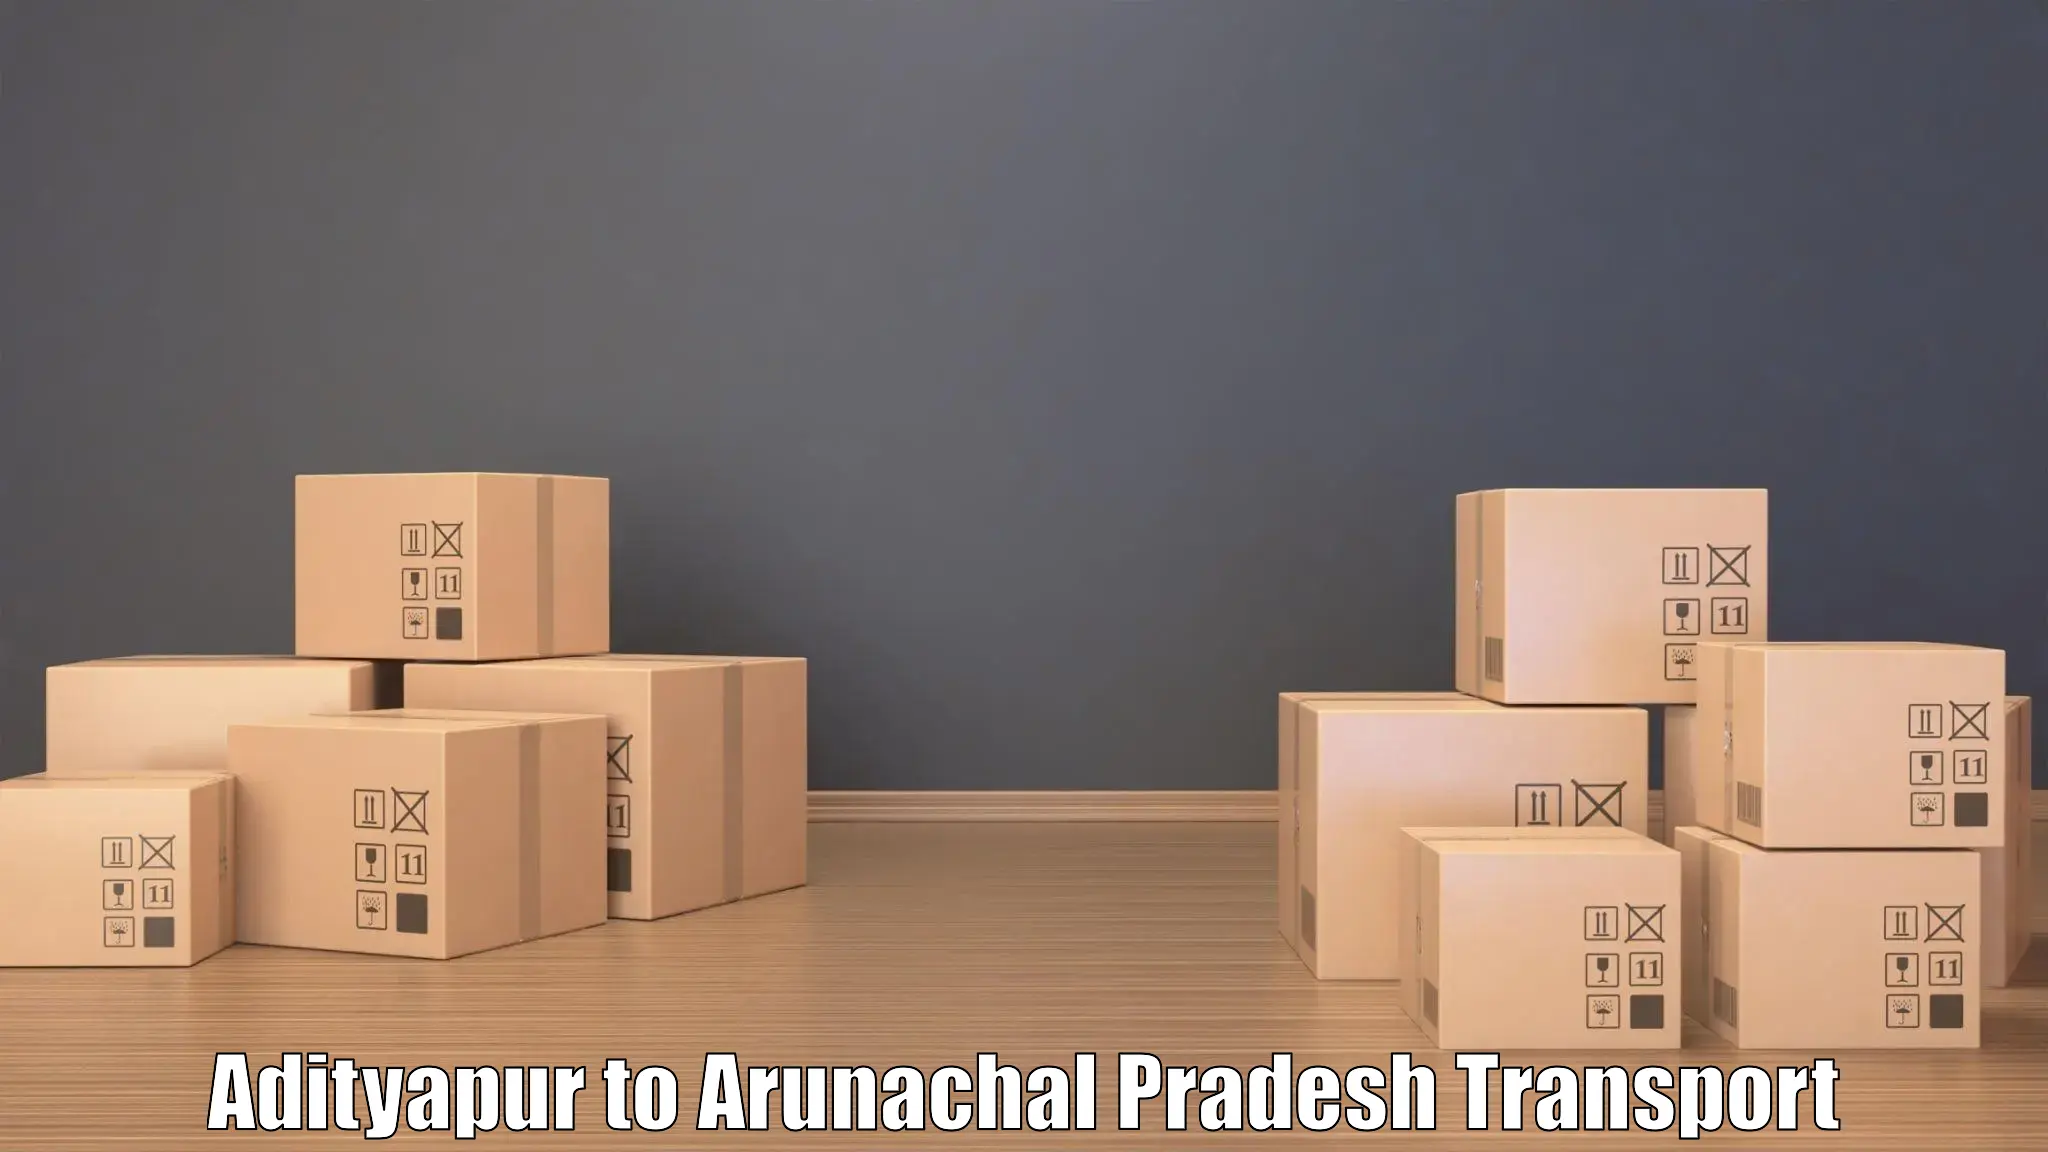 Air freight transport services Adityapur to Tirap